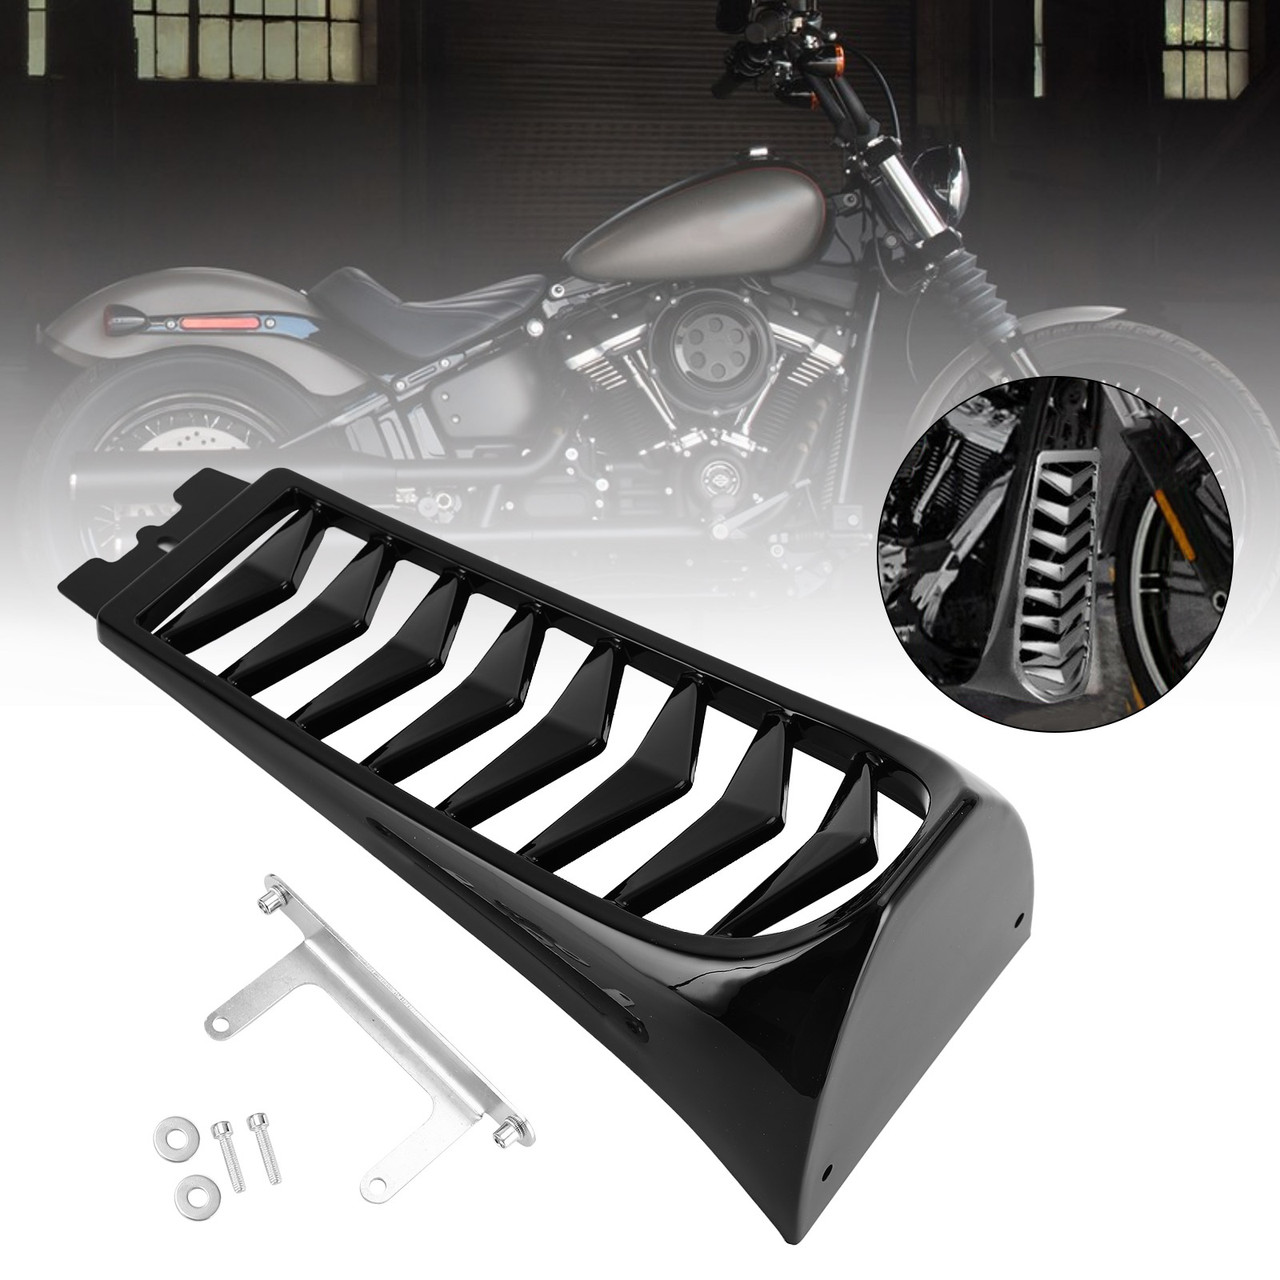 Front Chin Spoiler Lower Radiator Cover Fits for Harley Softail Street Bob Breakout Fat Bob 2018-2022 BLK